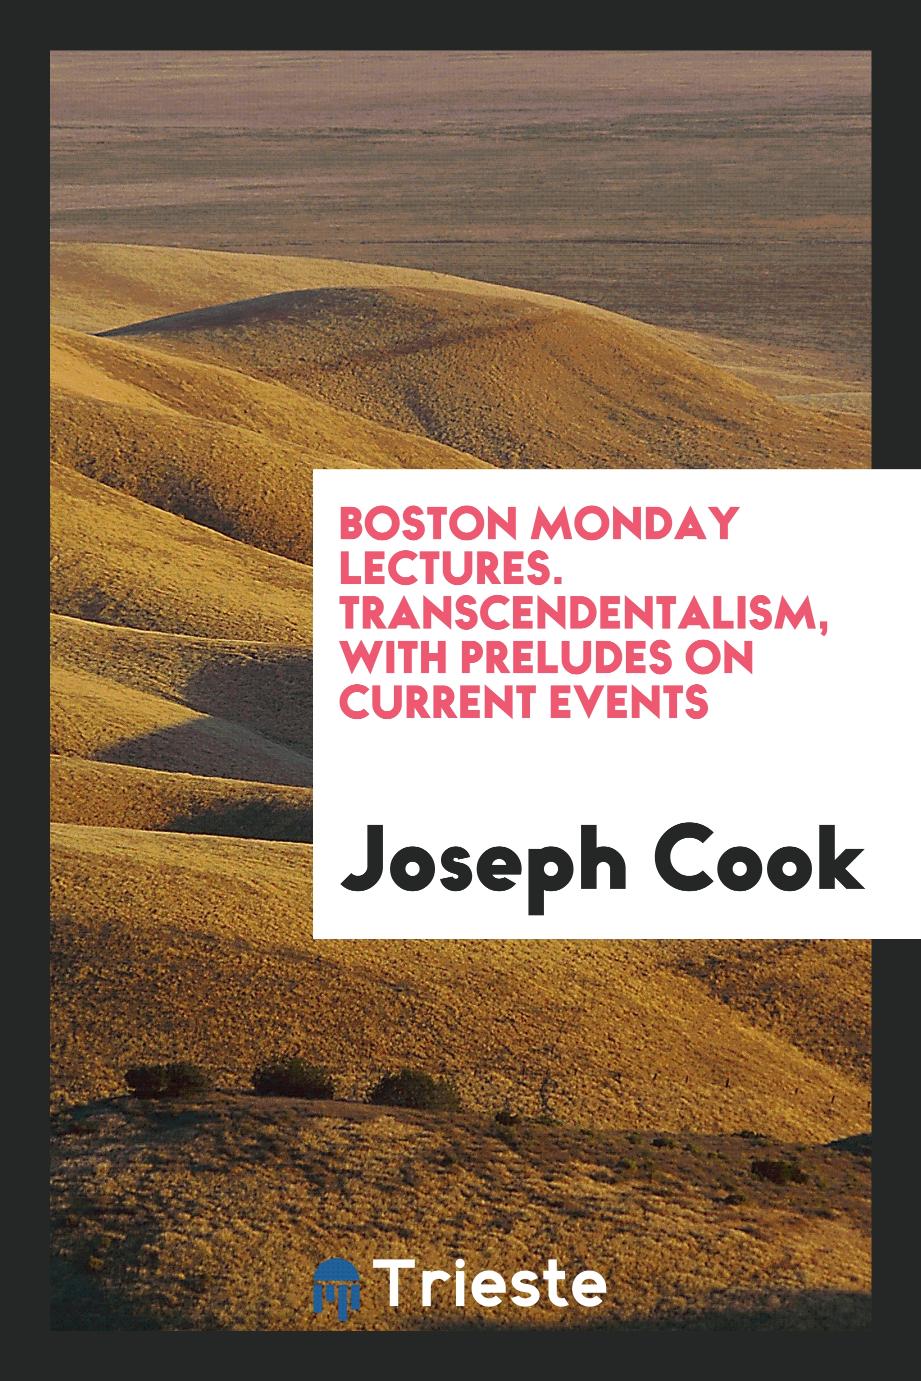 Boston Monday Lectures. Transcendentalism, with Preludes on Current Events